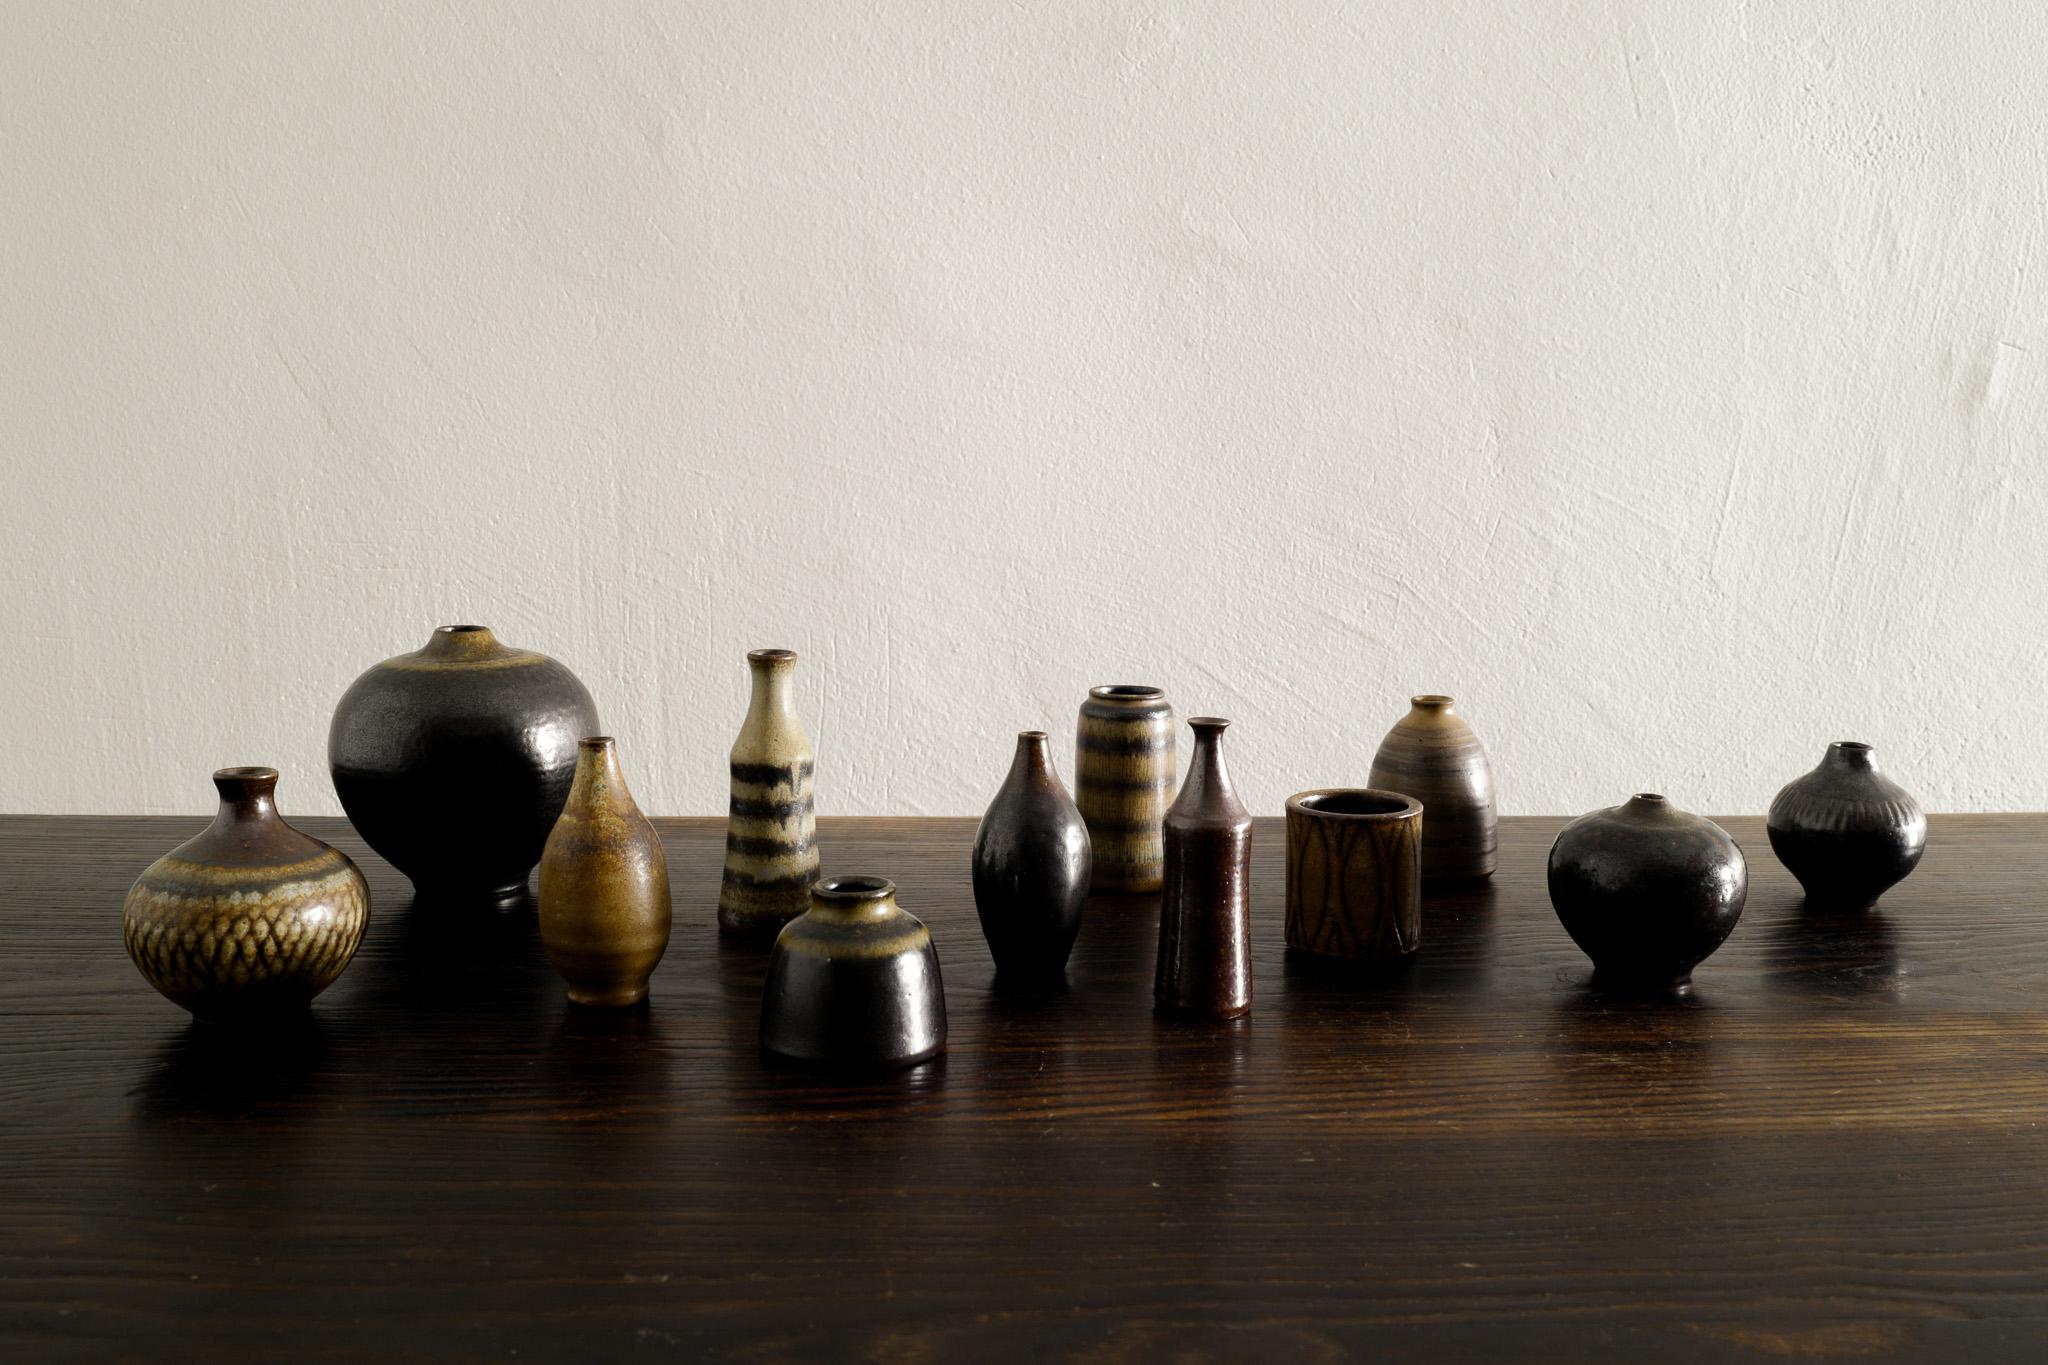 Rare set of 12 mid century miniature vases in glazed stoneware most likely designed by Arthur Andersson and produced by Wallåkra, Sweden in the 1940s. 
In great vintage and original condition, all signed. 

Dimensions: H: 4,5-9,5 cm Diameters: